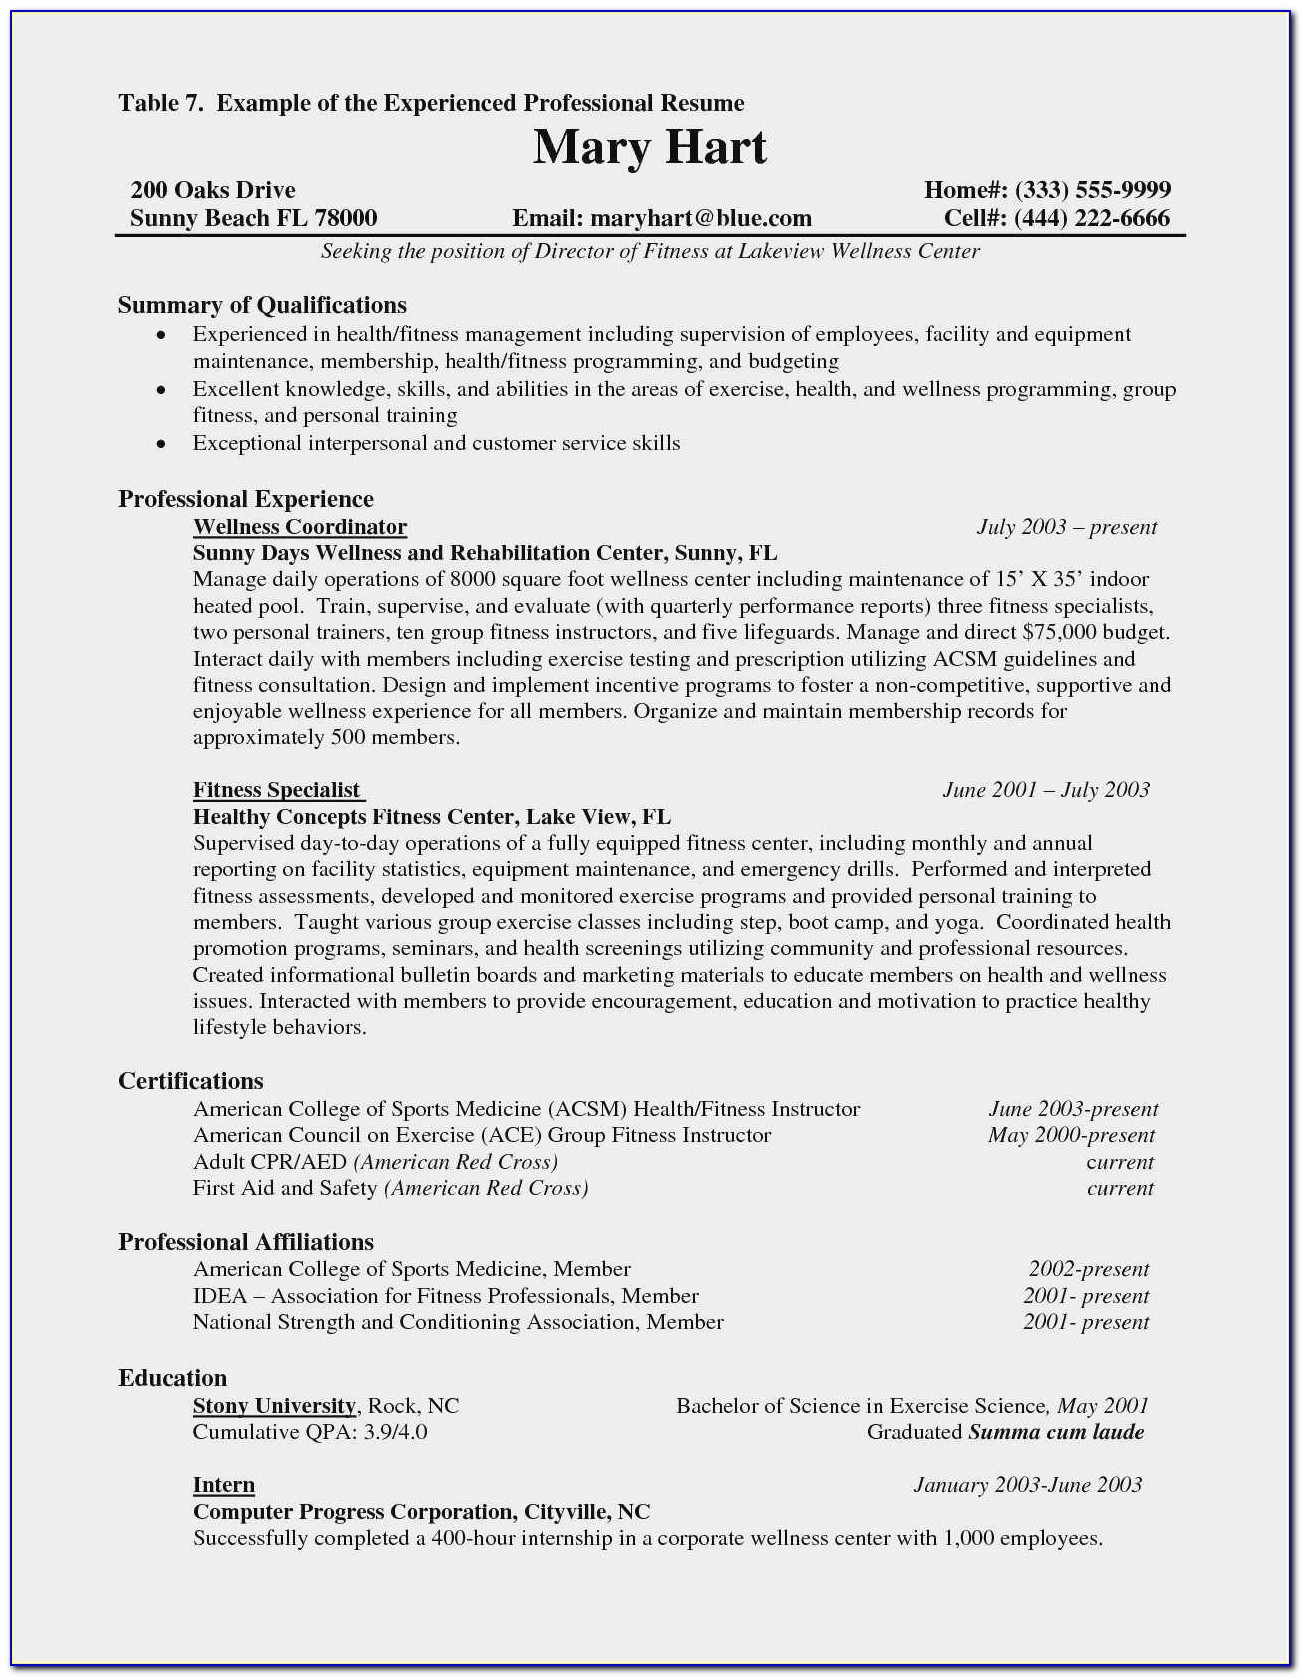 Get A Professional Resume Made